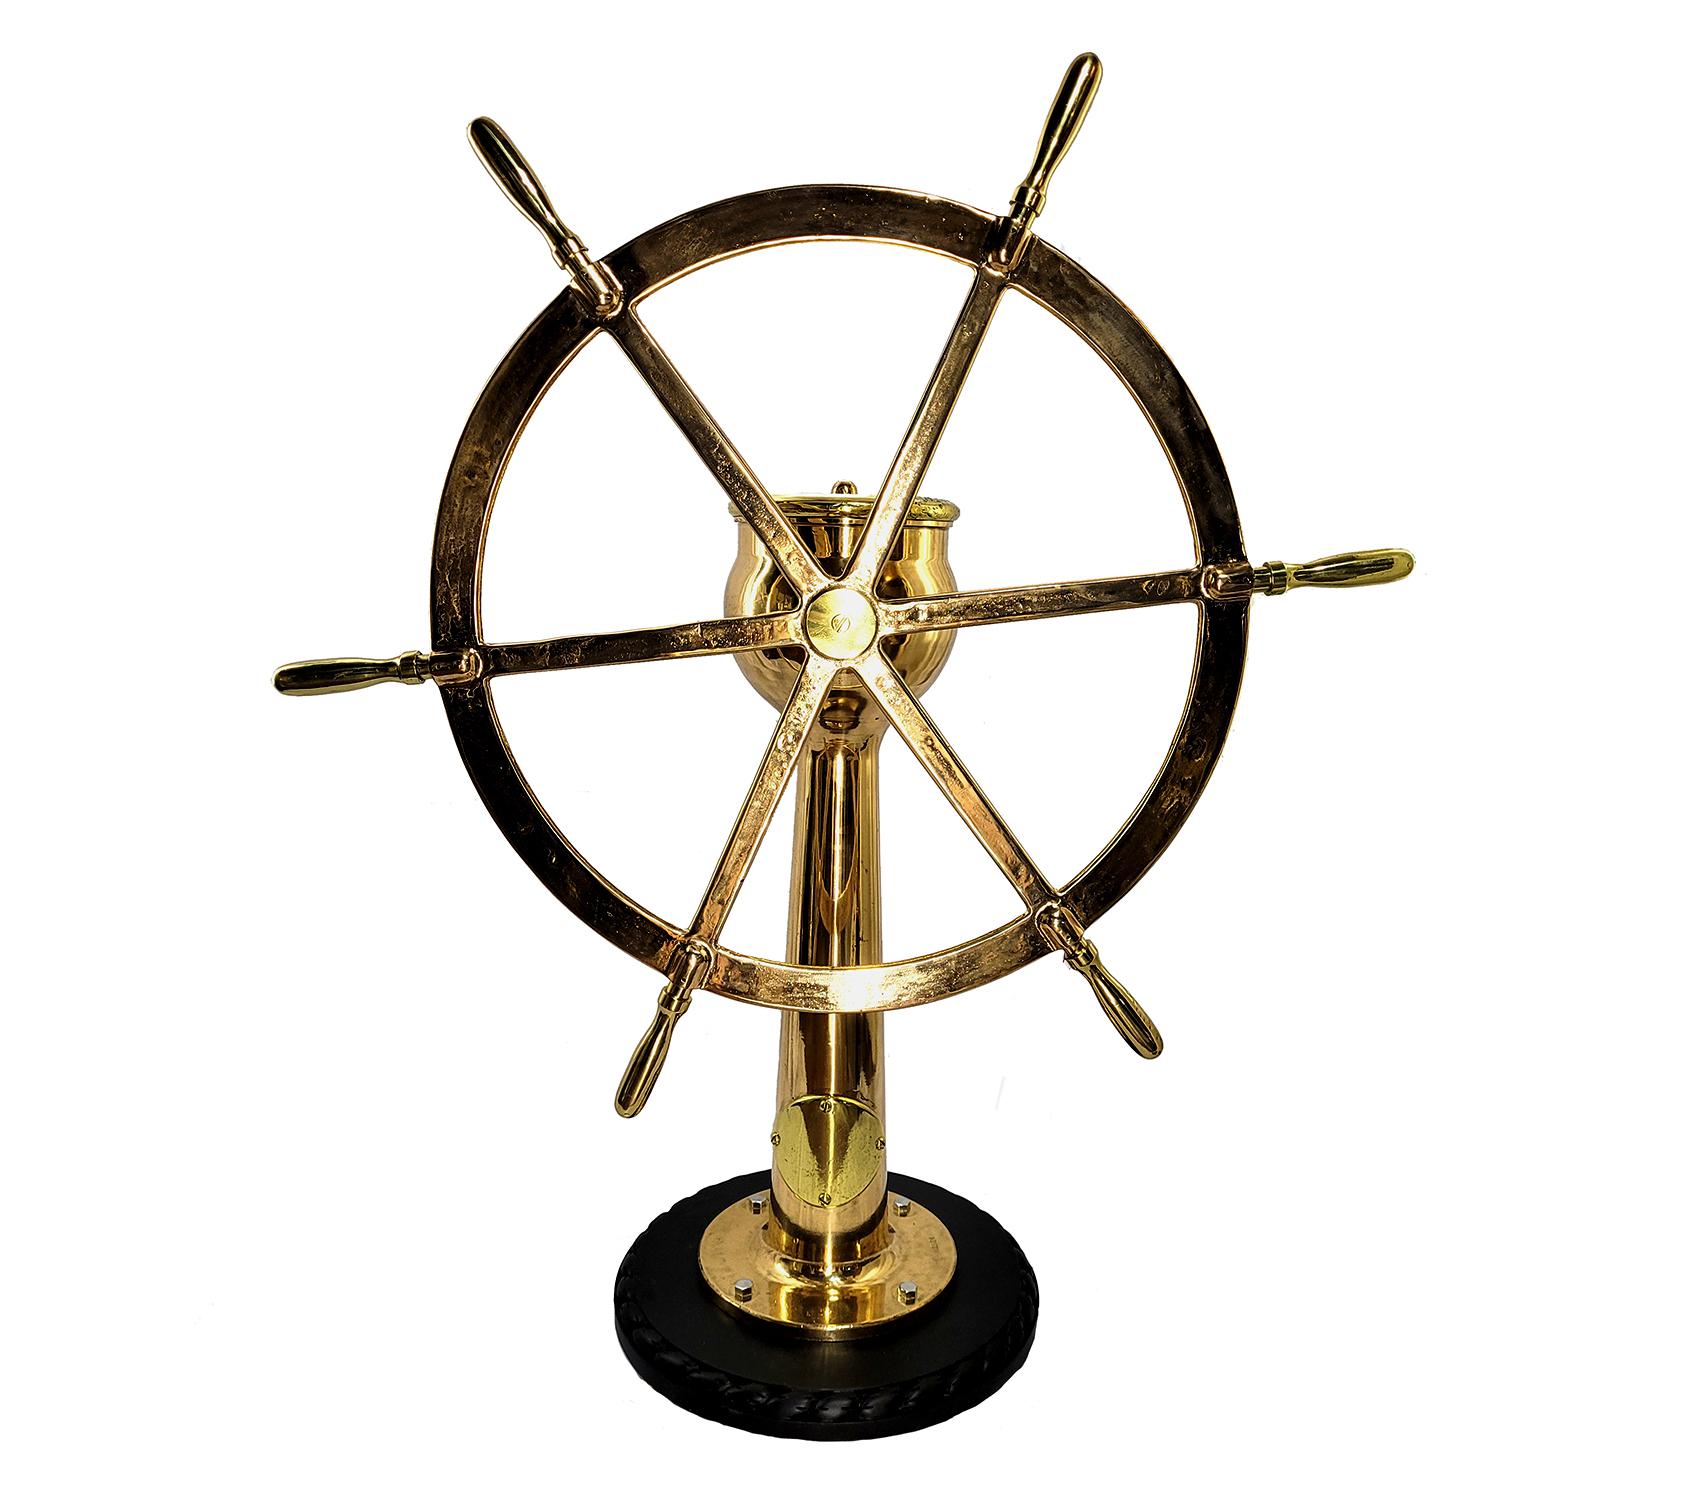 Highly polished ships wheel on geared pedestal. Meticulously polished and lacquered ships wheel mounted to a thick wood base. Wheel diameter is 44 inches. Rudder indicator arrow on pedestal indicates left and right. This works when wheel is turned.